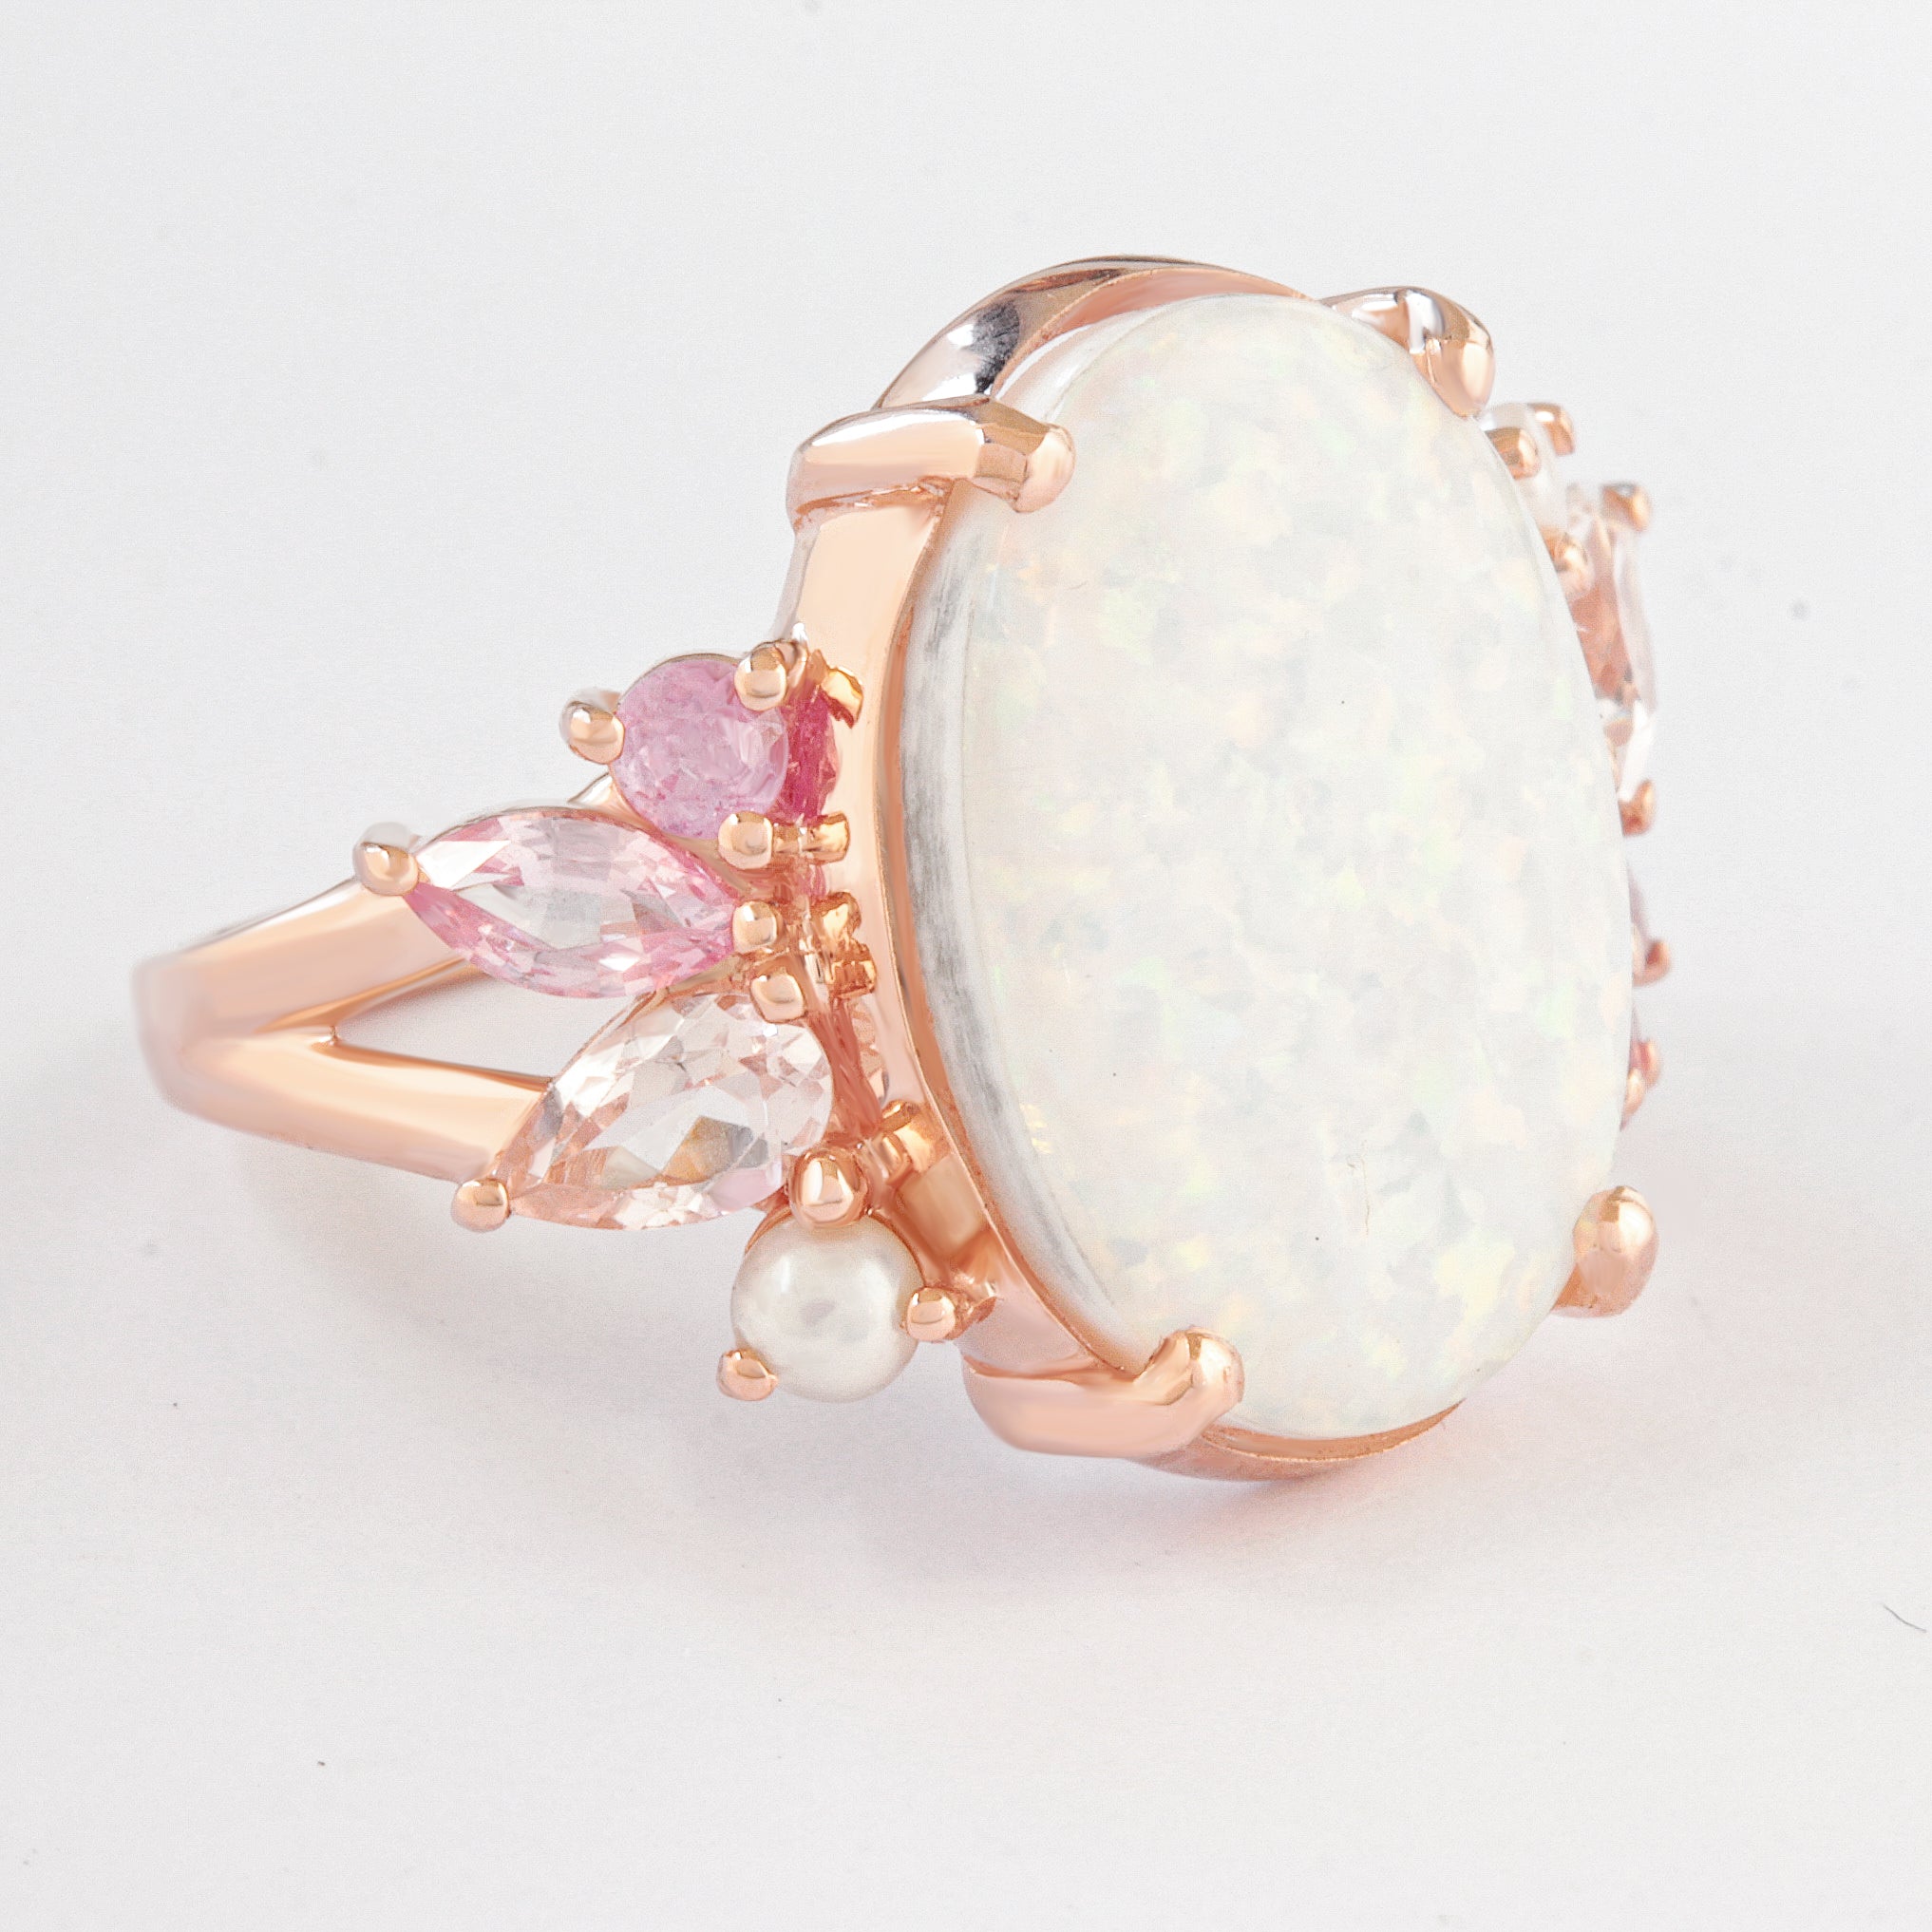 OOAK White Opal, Pink Gemstones and pearls Engagement Ring ♥